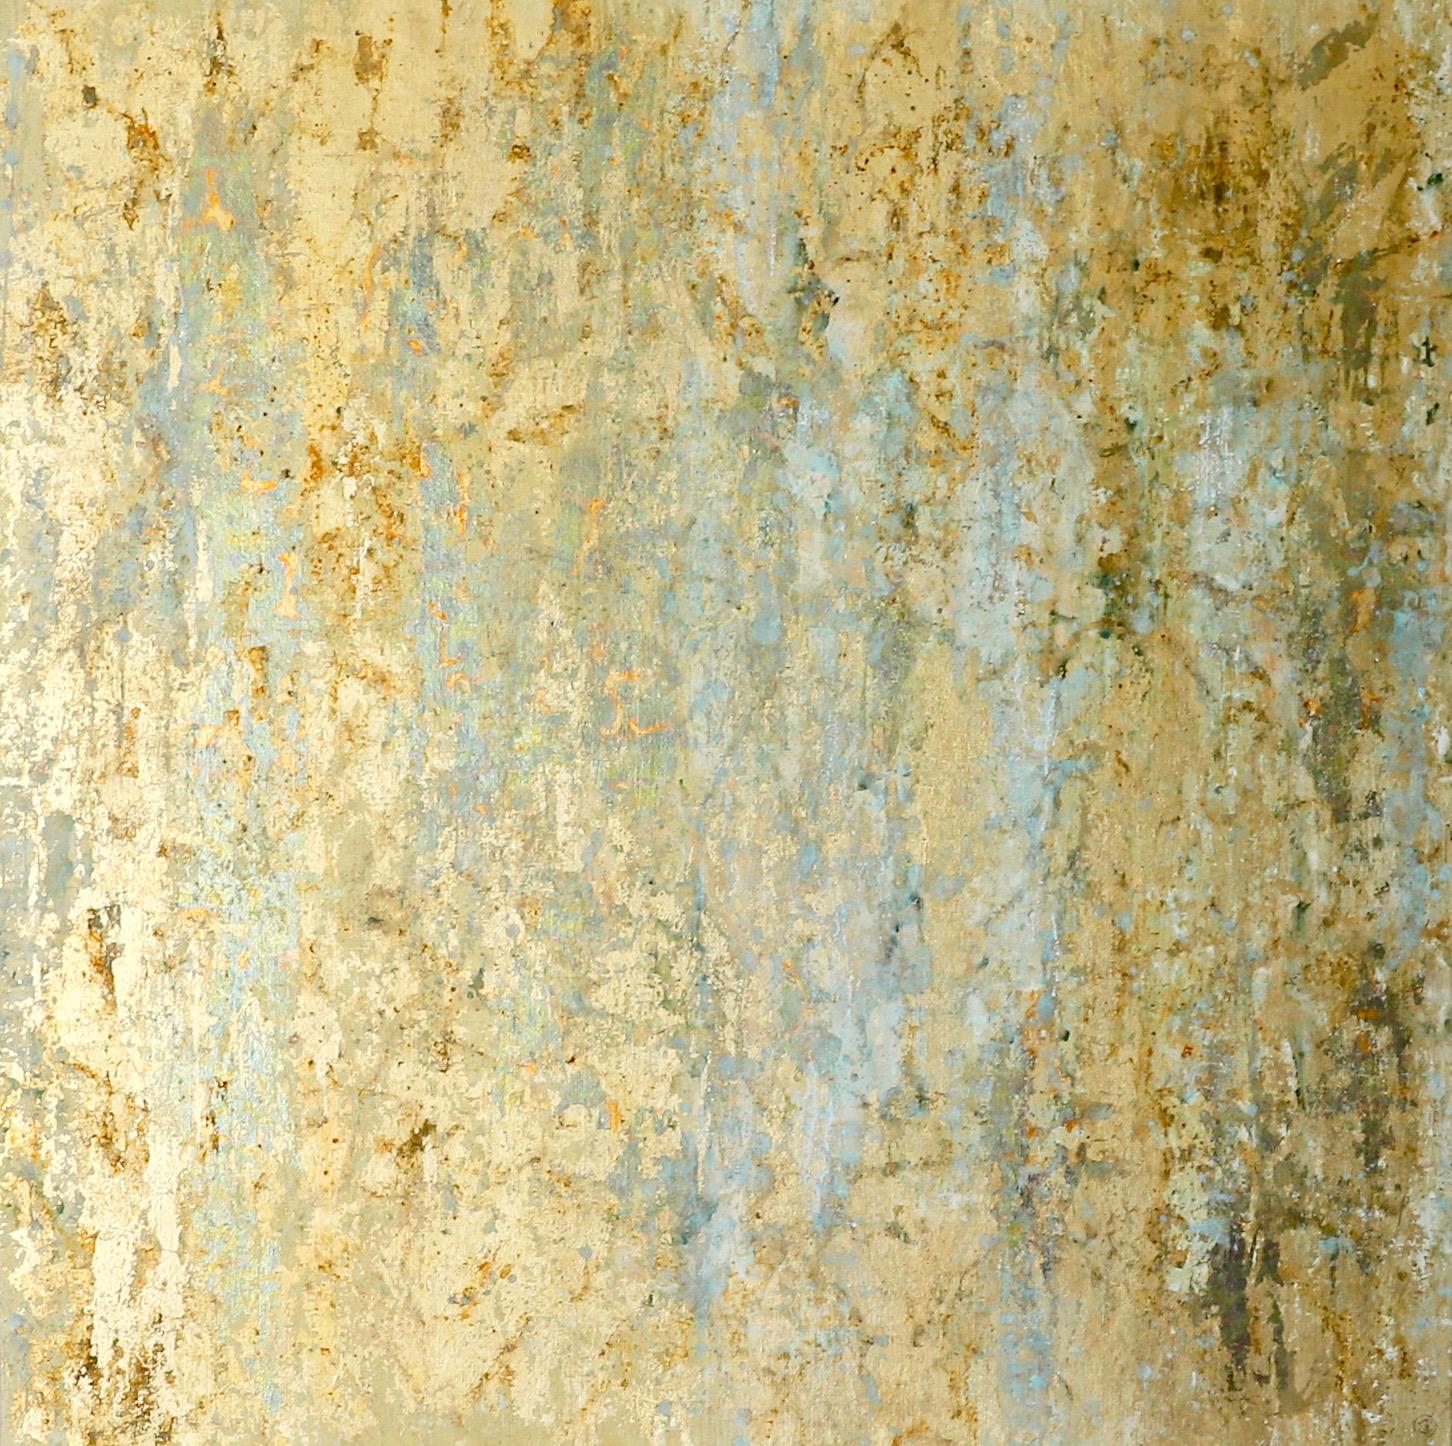 Nicolas Galtier Abstract Painting - N° 150-19, 2020 (Painting Gold Leaf)